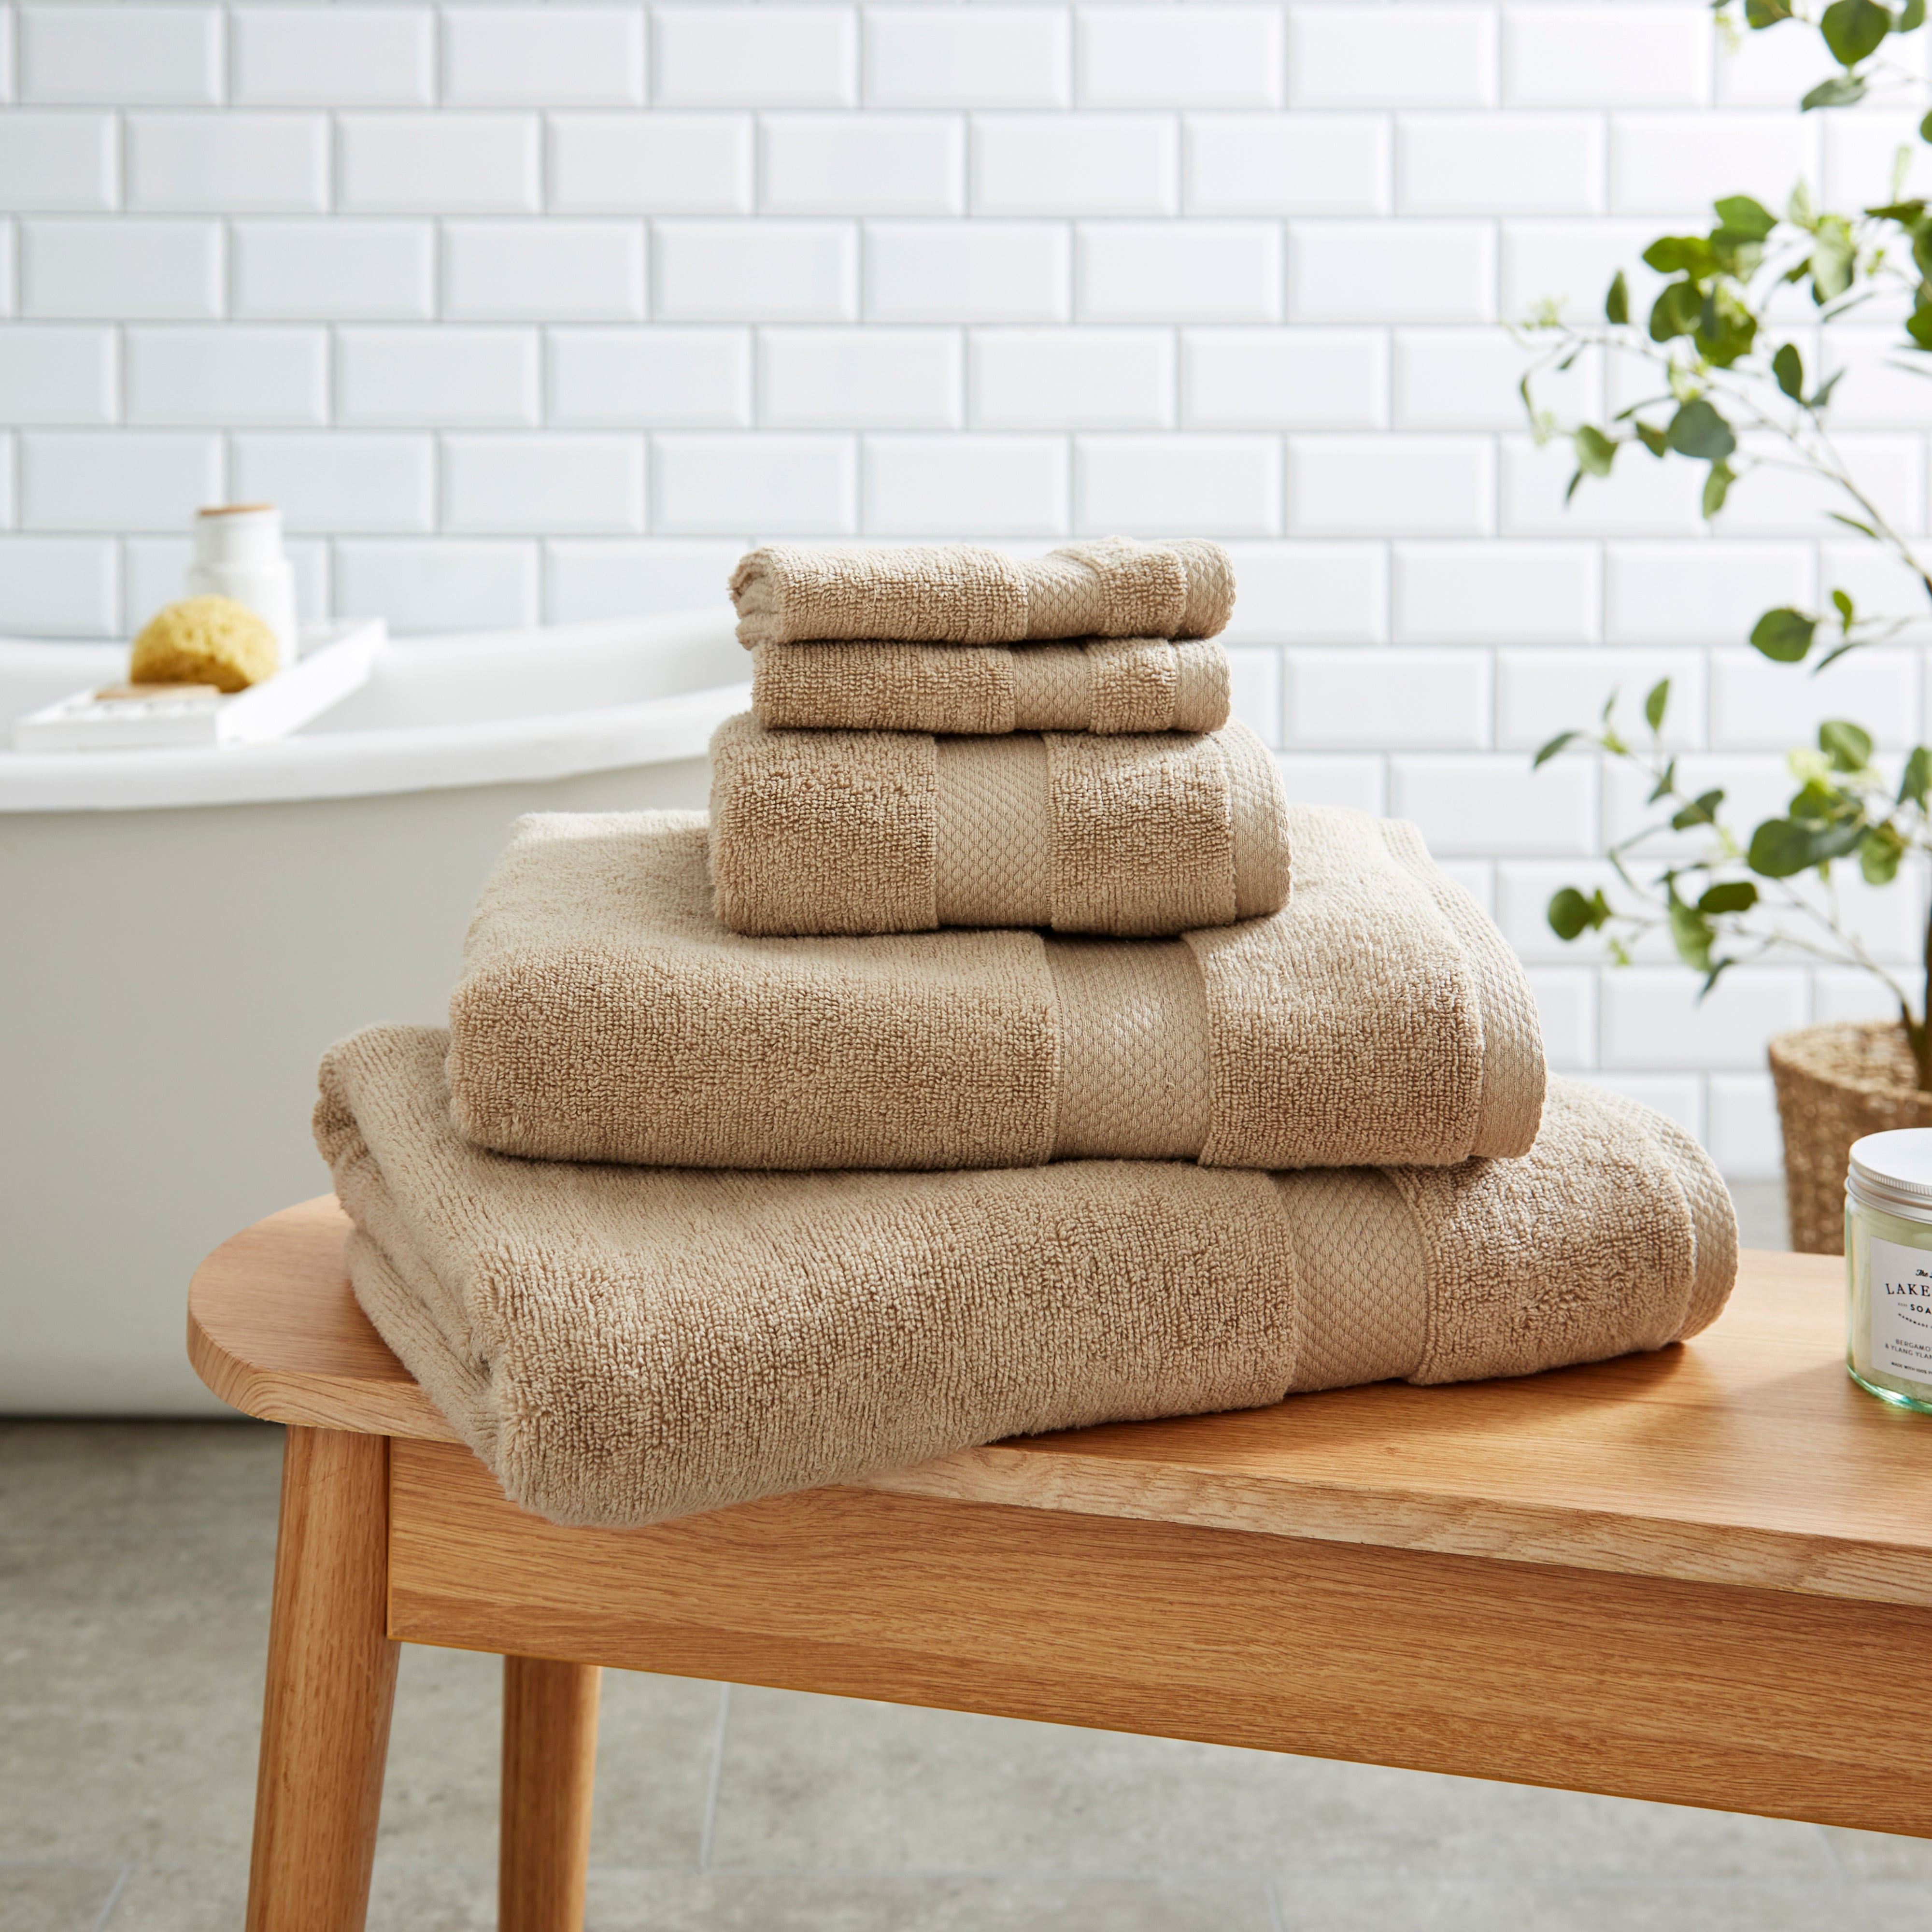 Soft and Fluffy 100% Cotton Natural Towel